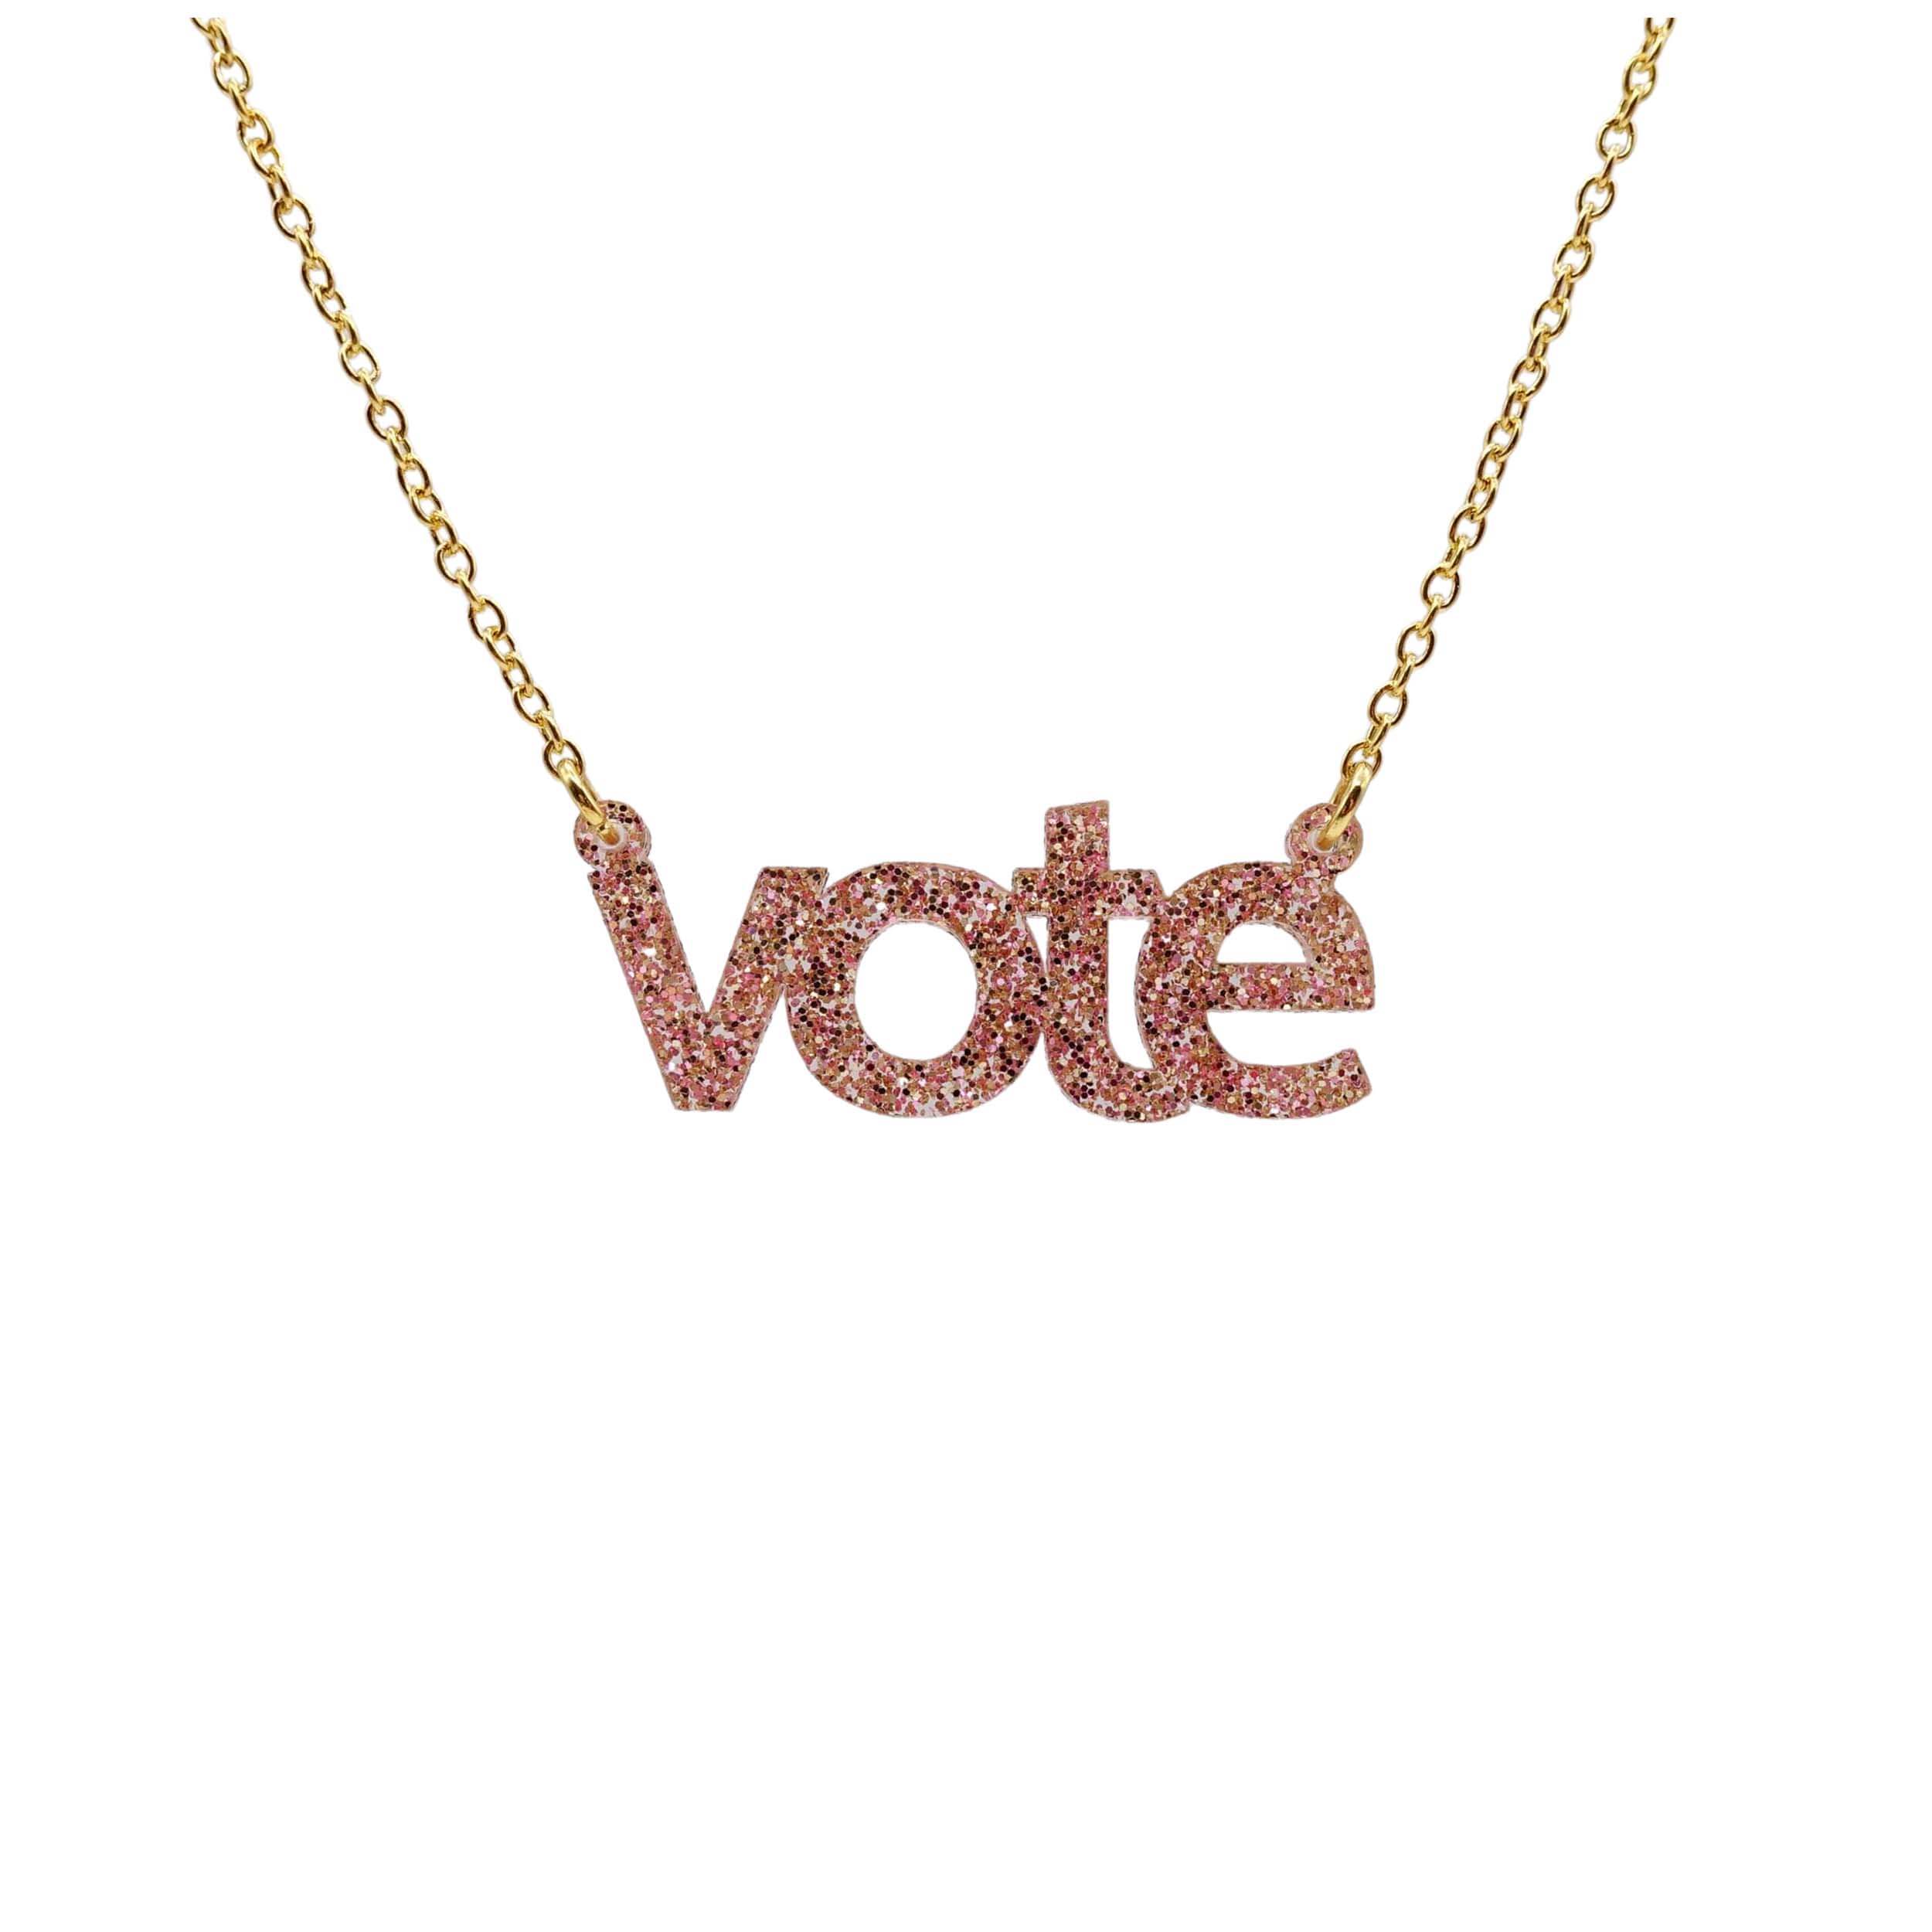 Vote necklace in pink fizz glitter shown hanging against a white background. 